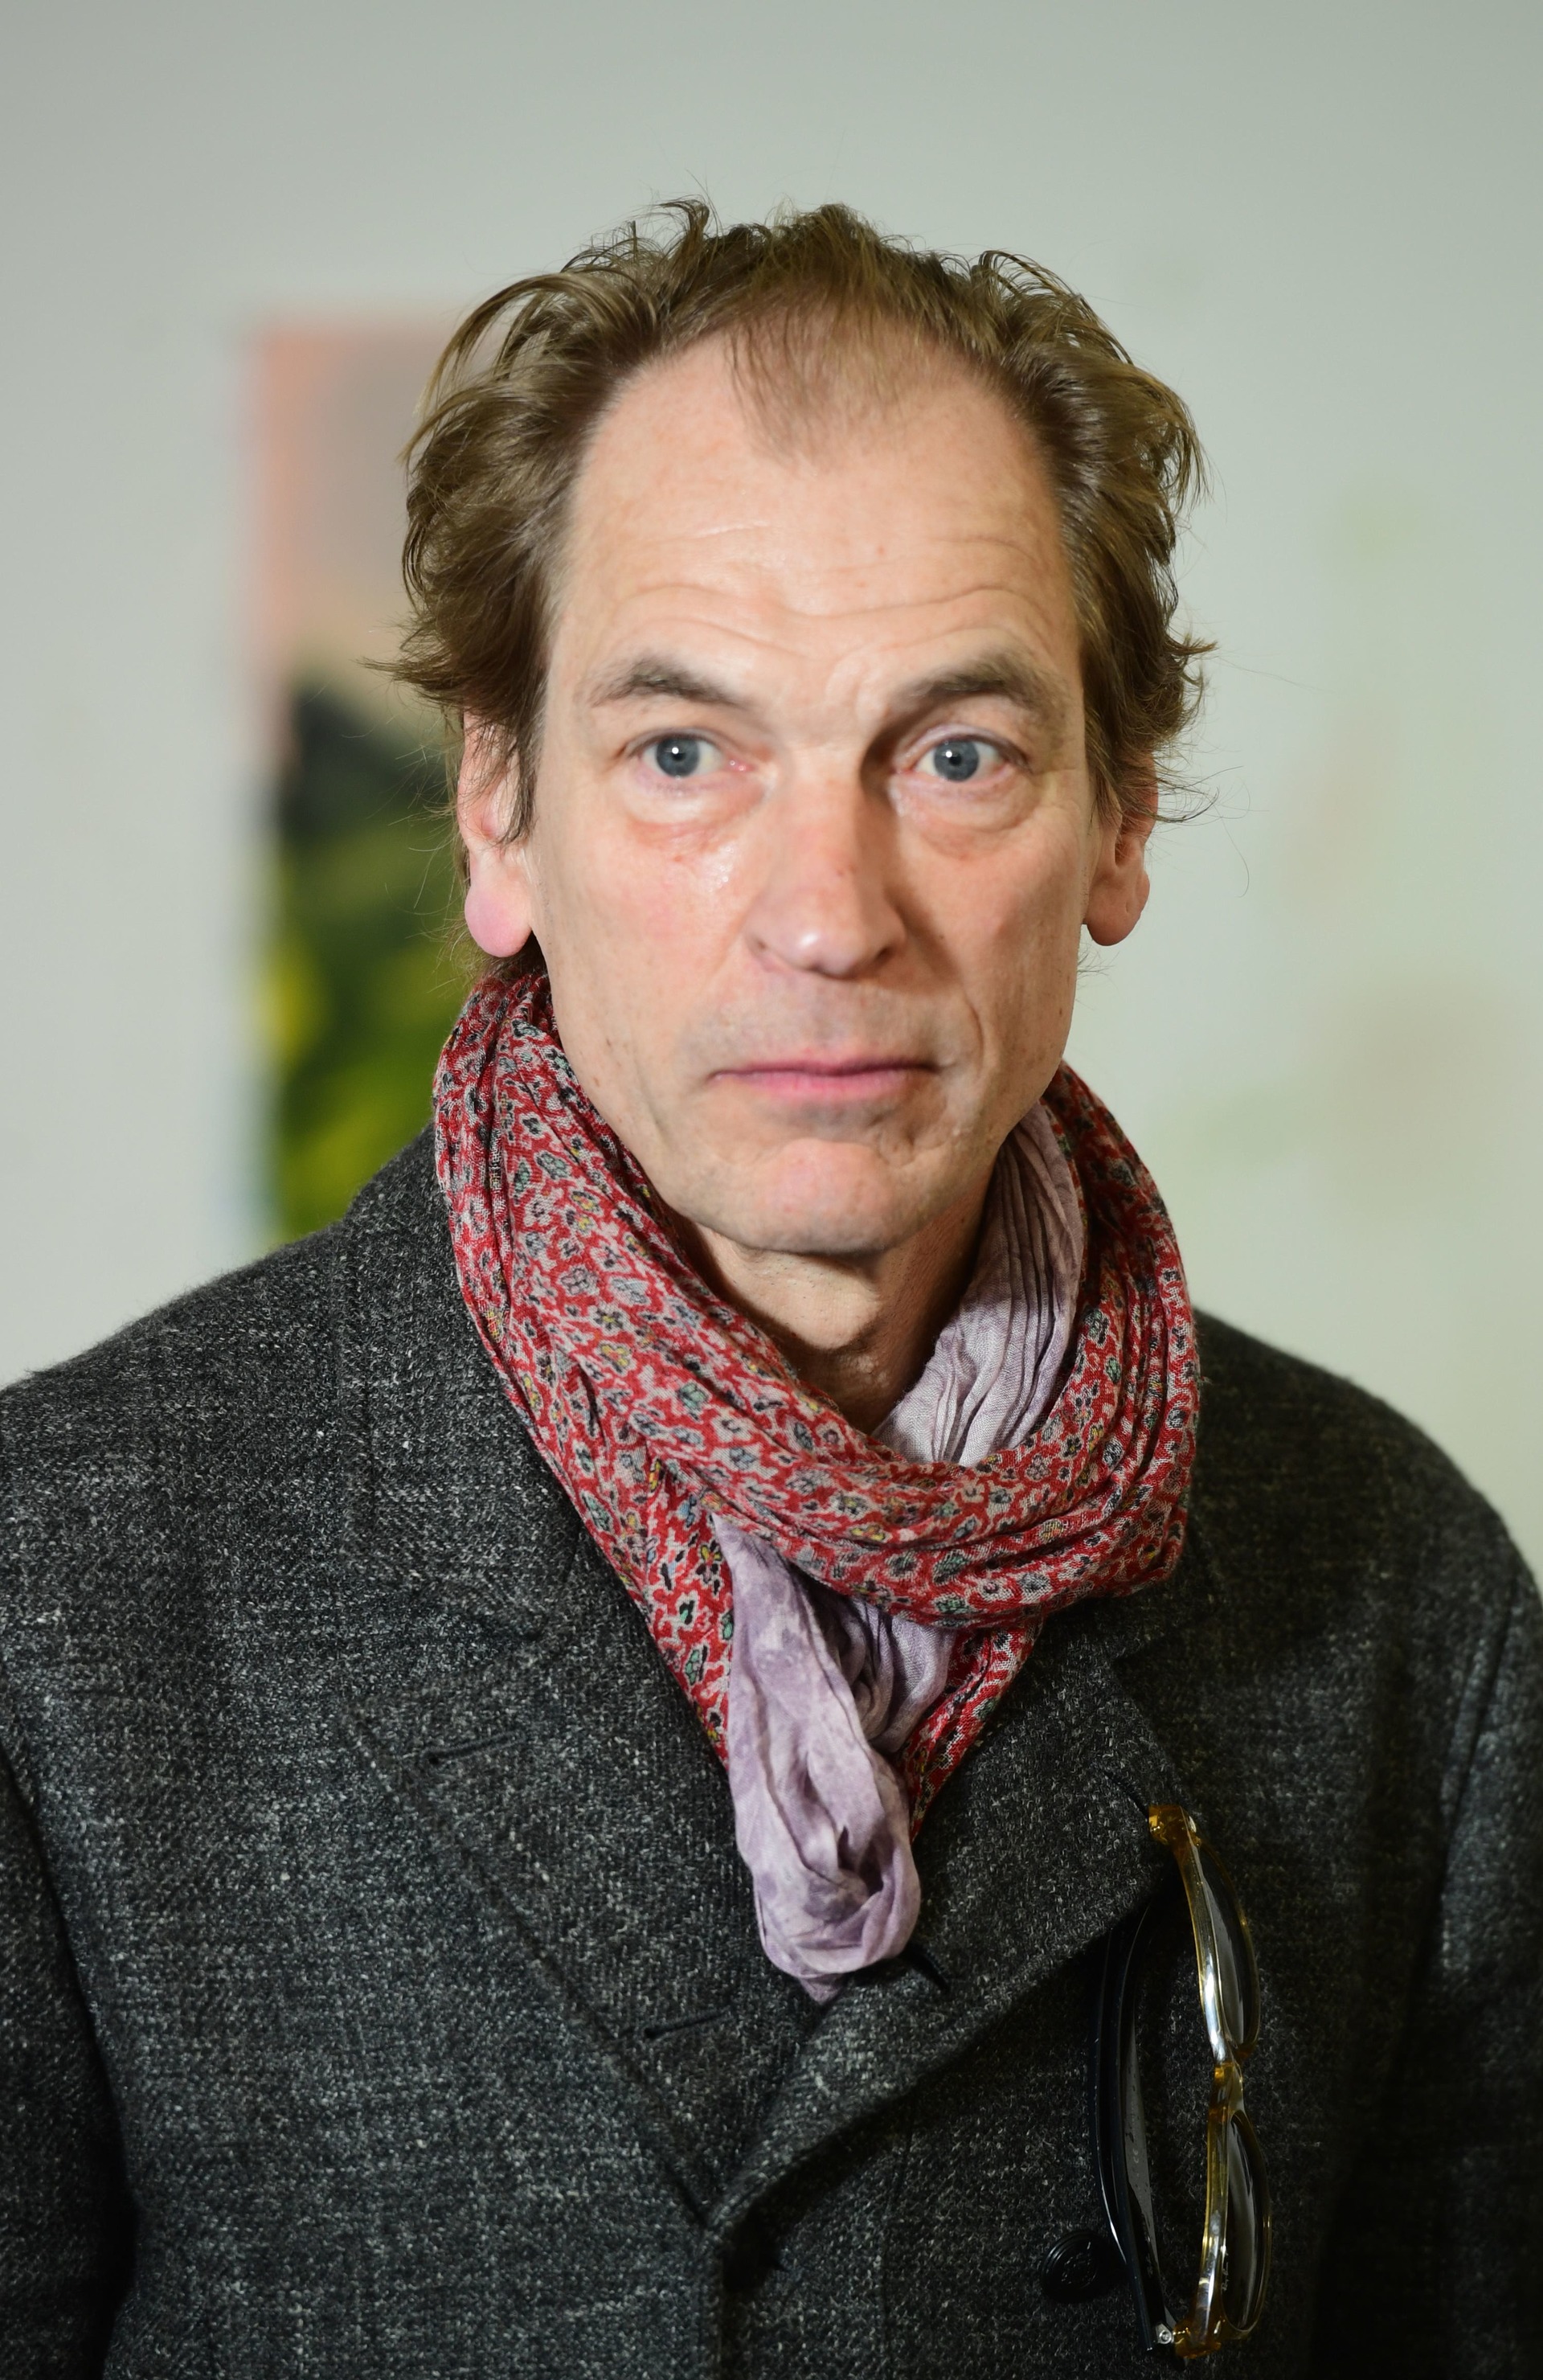 Julian Sands was reported as missing in January.